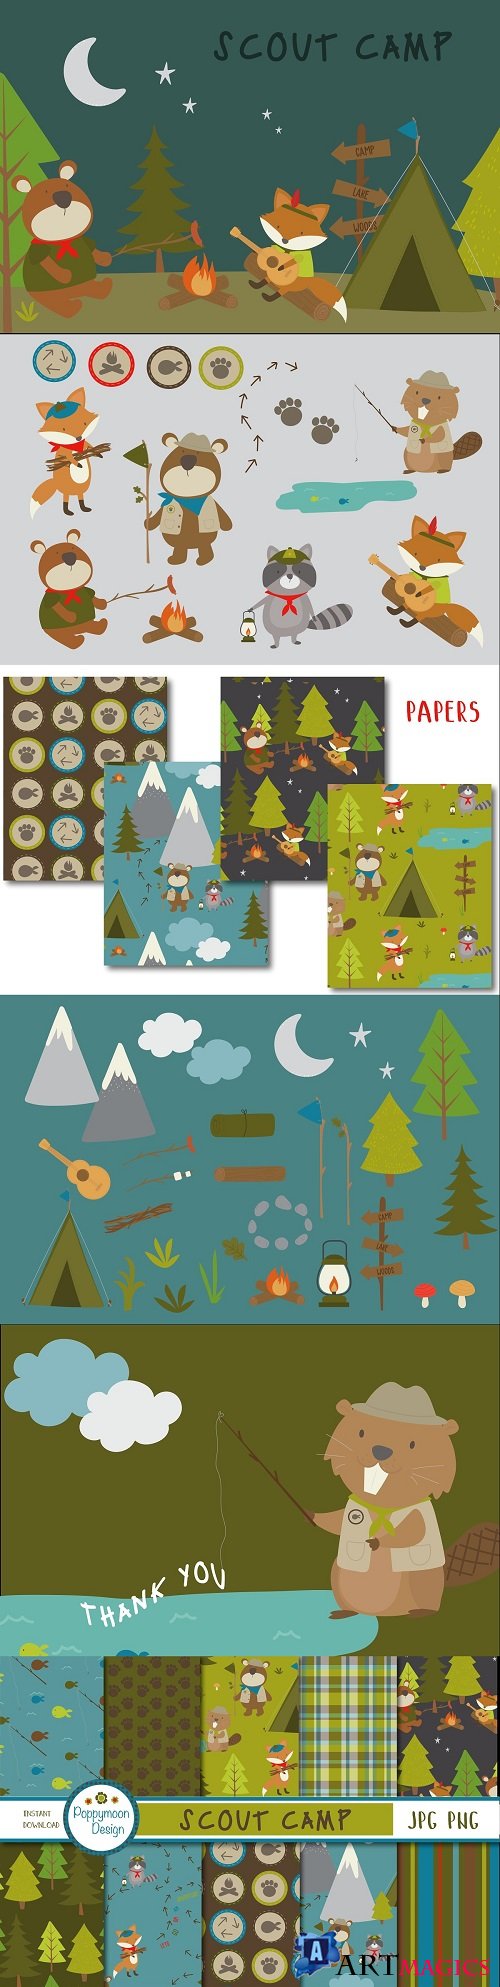 Scout Camp Clipart and Paper - 4239672